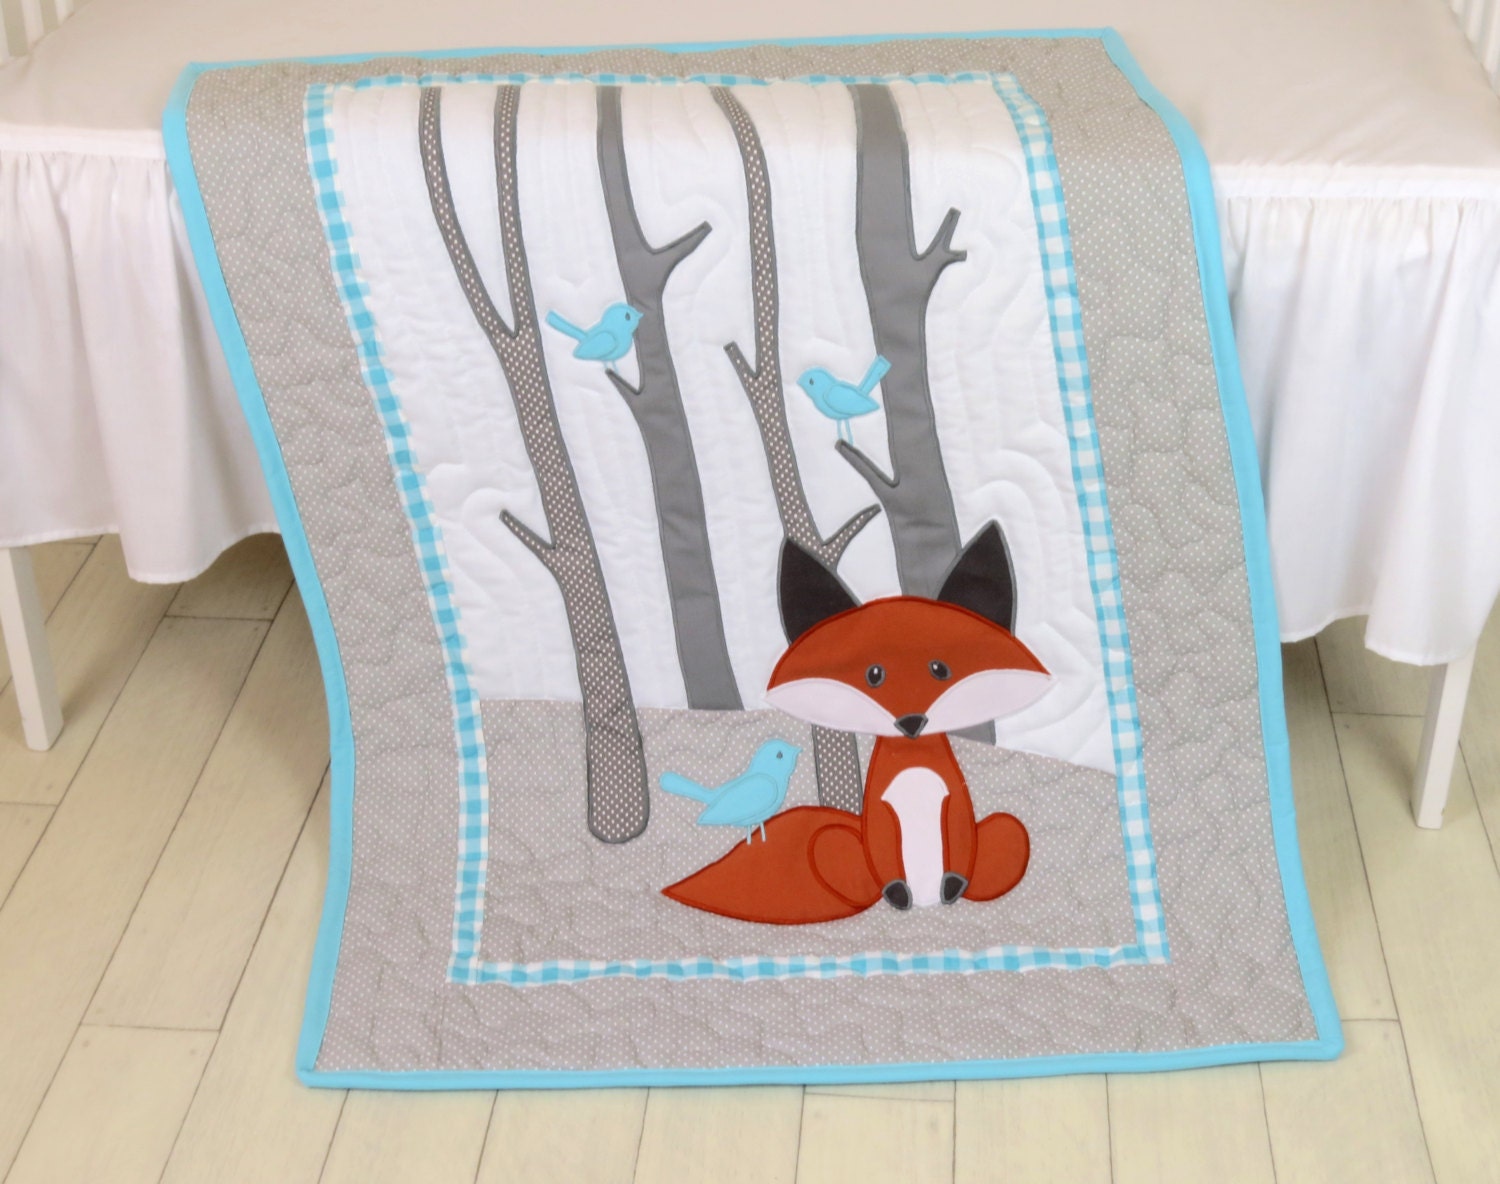 animal parade 2 charming applique quilts for babies